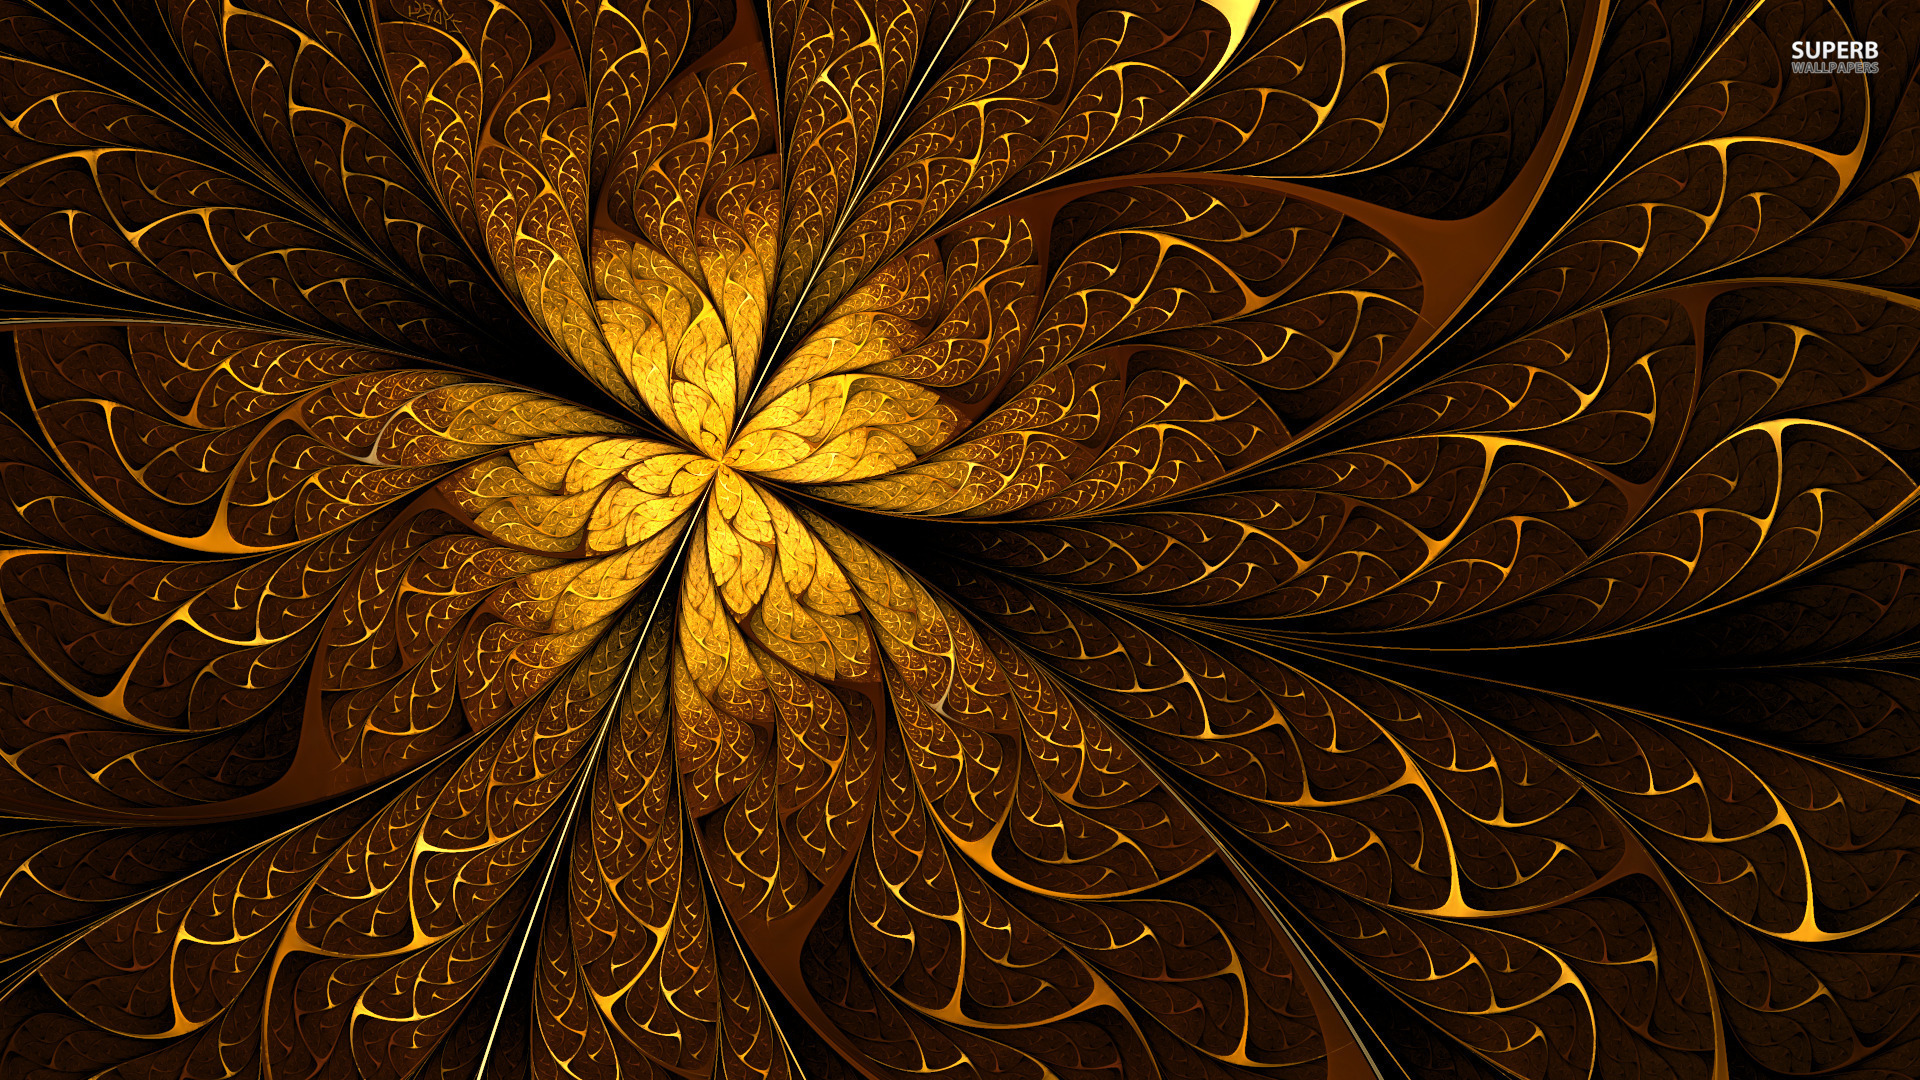 Abstract Swirls Windows 81 Theme And Wallpaper All For Windows 10 1920x1080